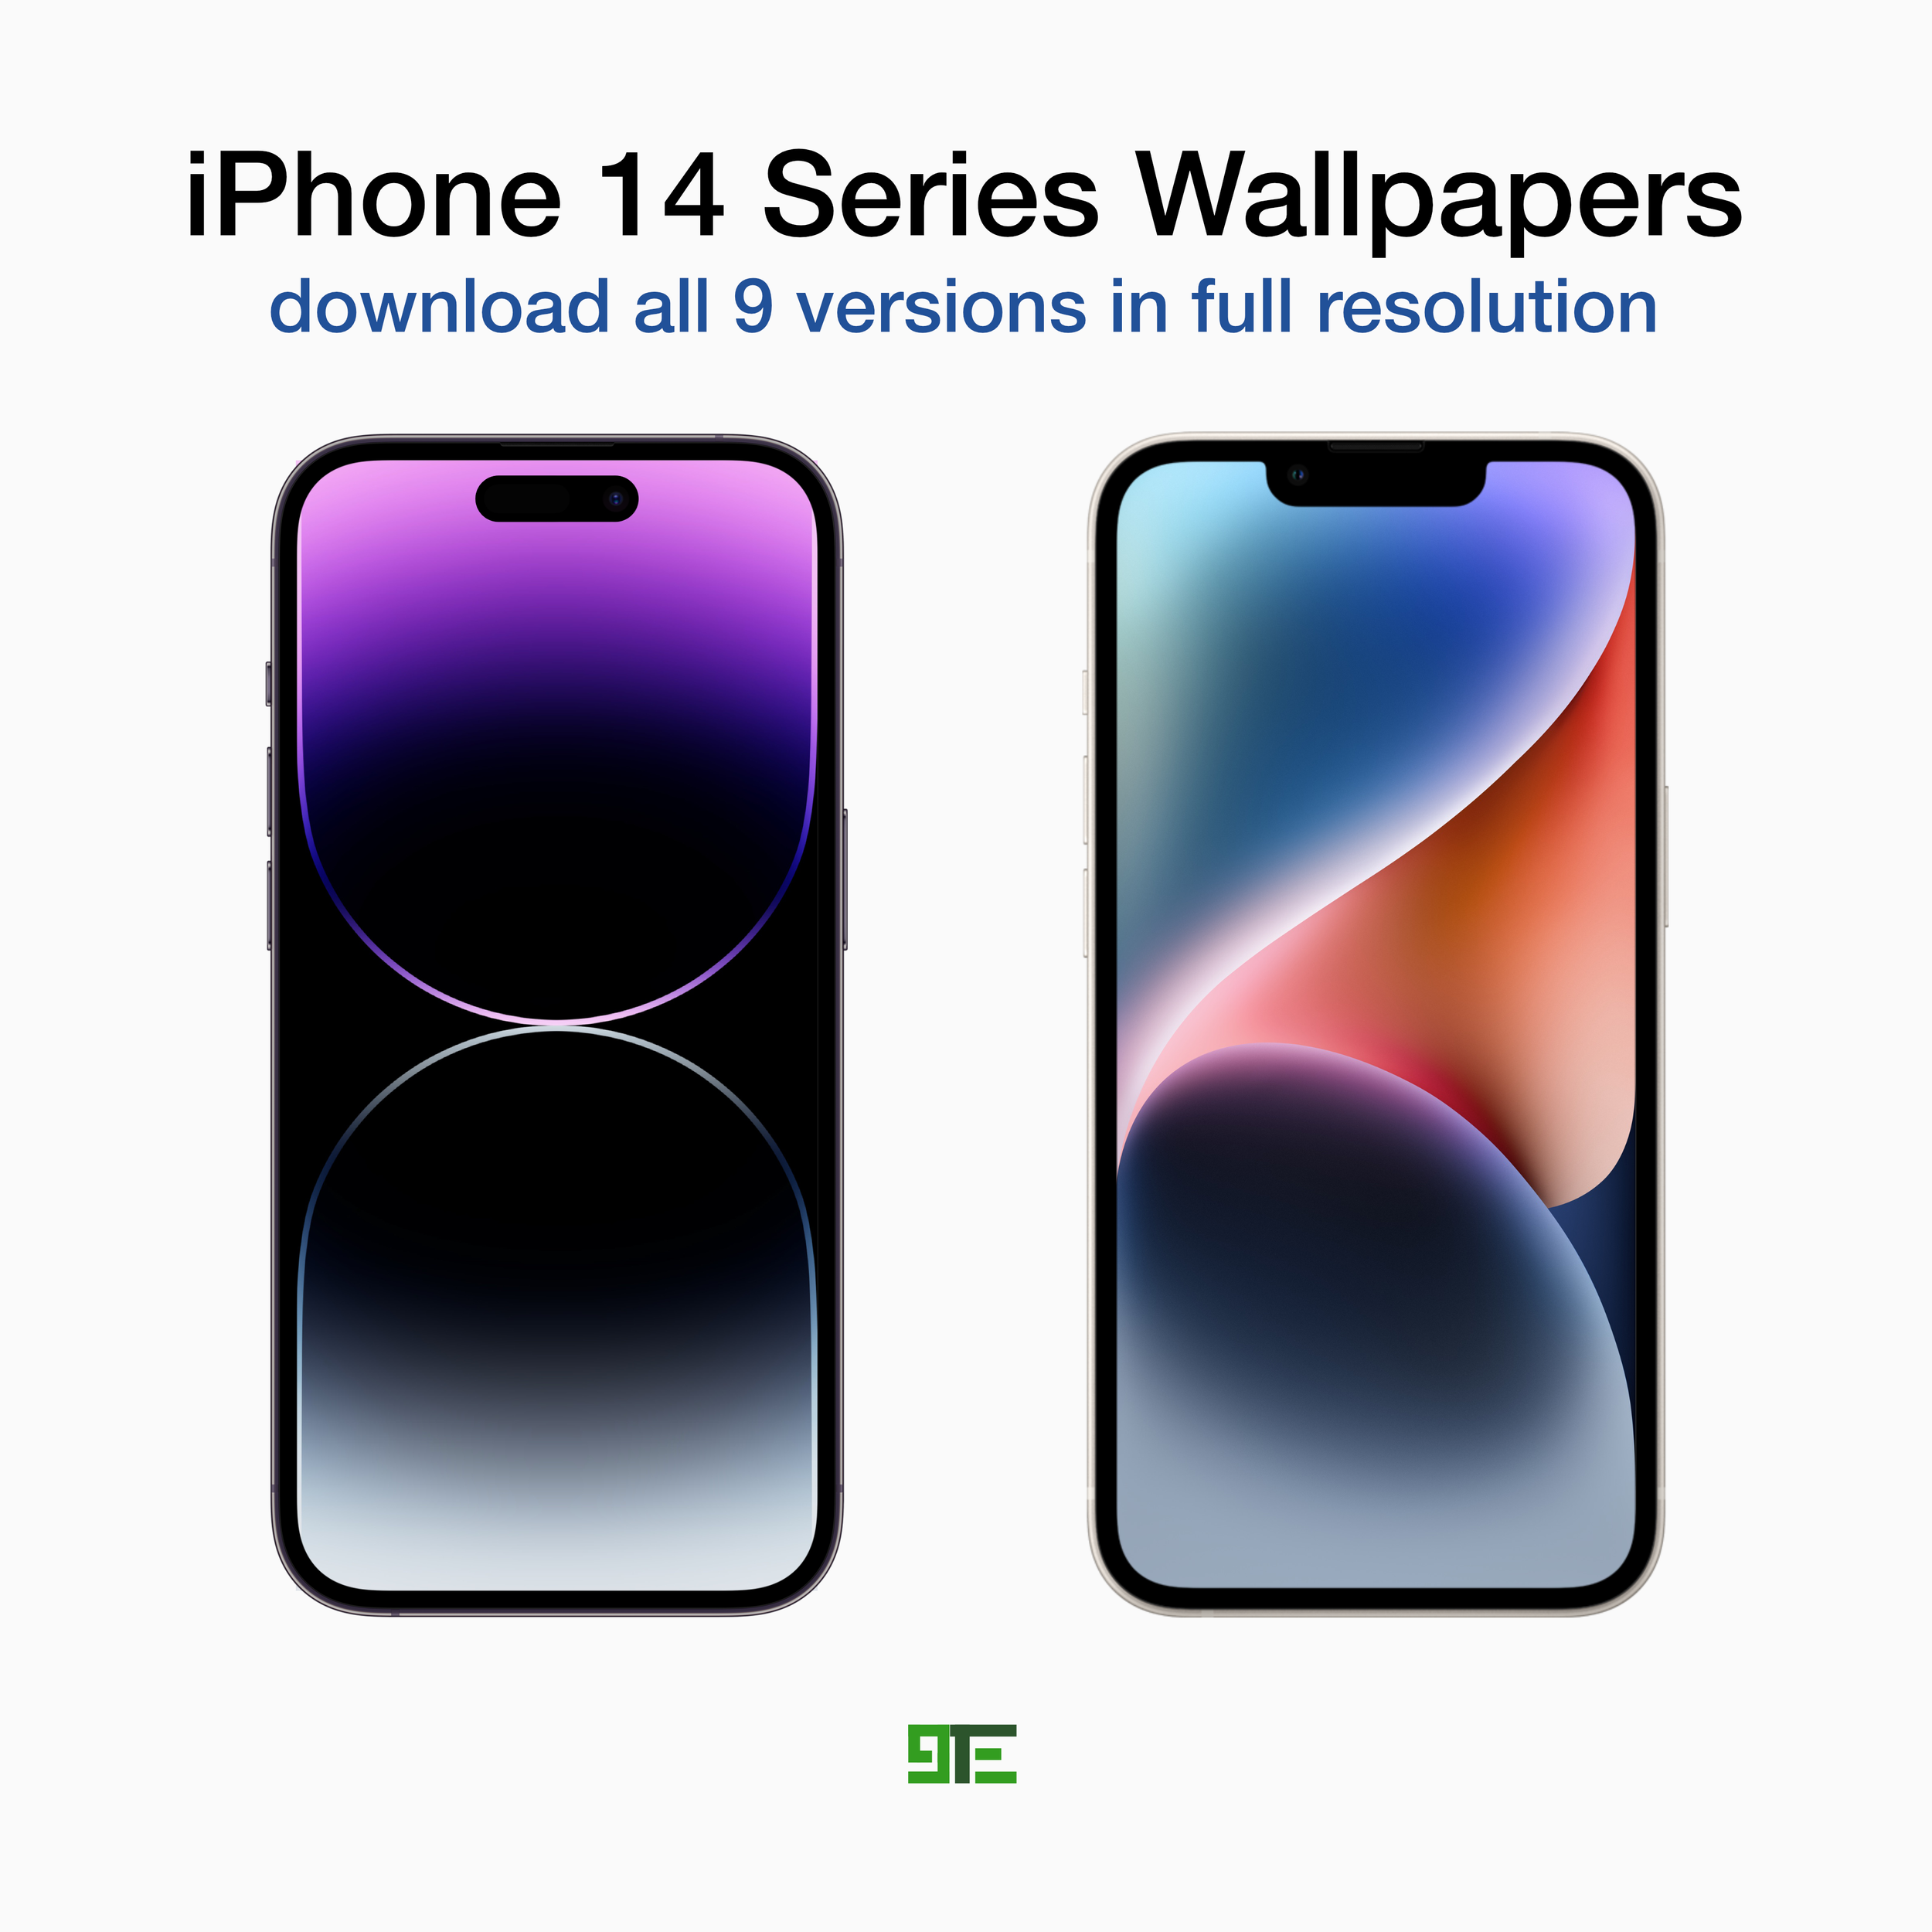 5 BEAUTIFUL WALLPAPERS FOR PHONE